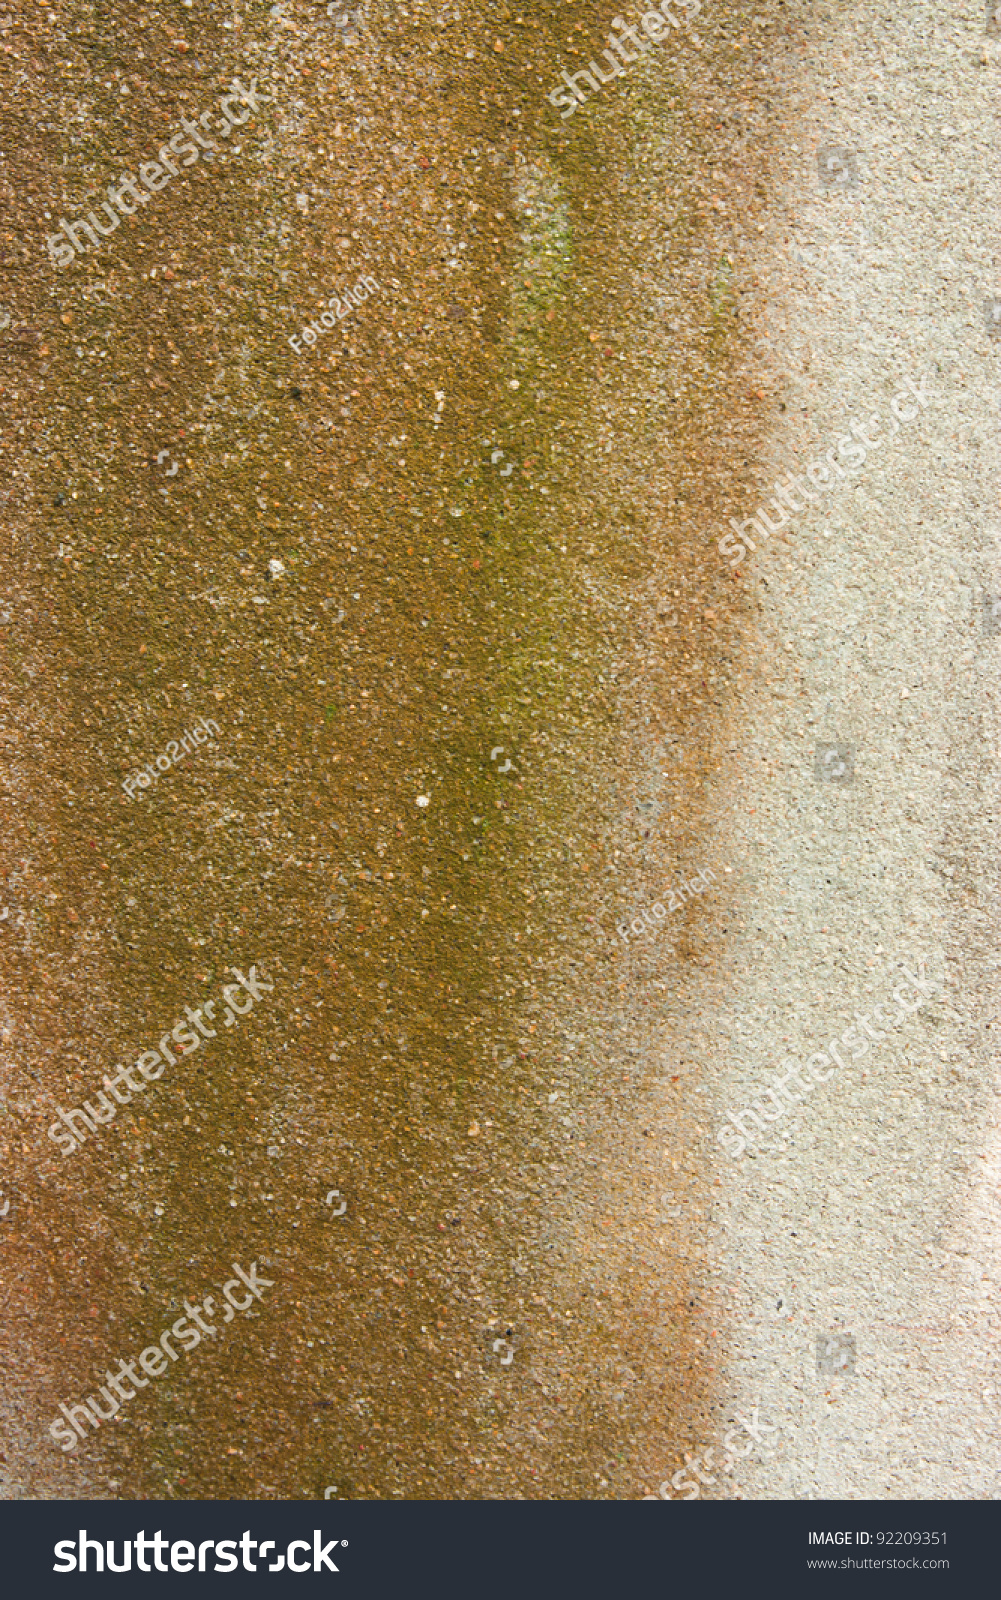 Natural Color Of Cement Wall Texture Surface Stock Photo 92209351